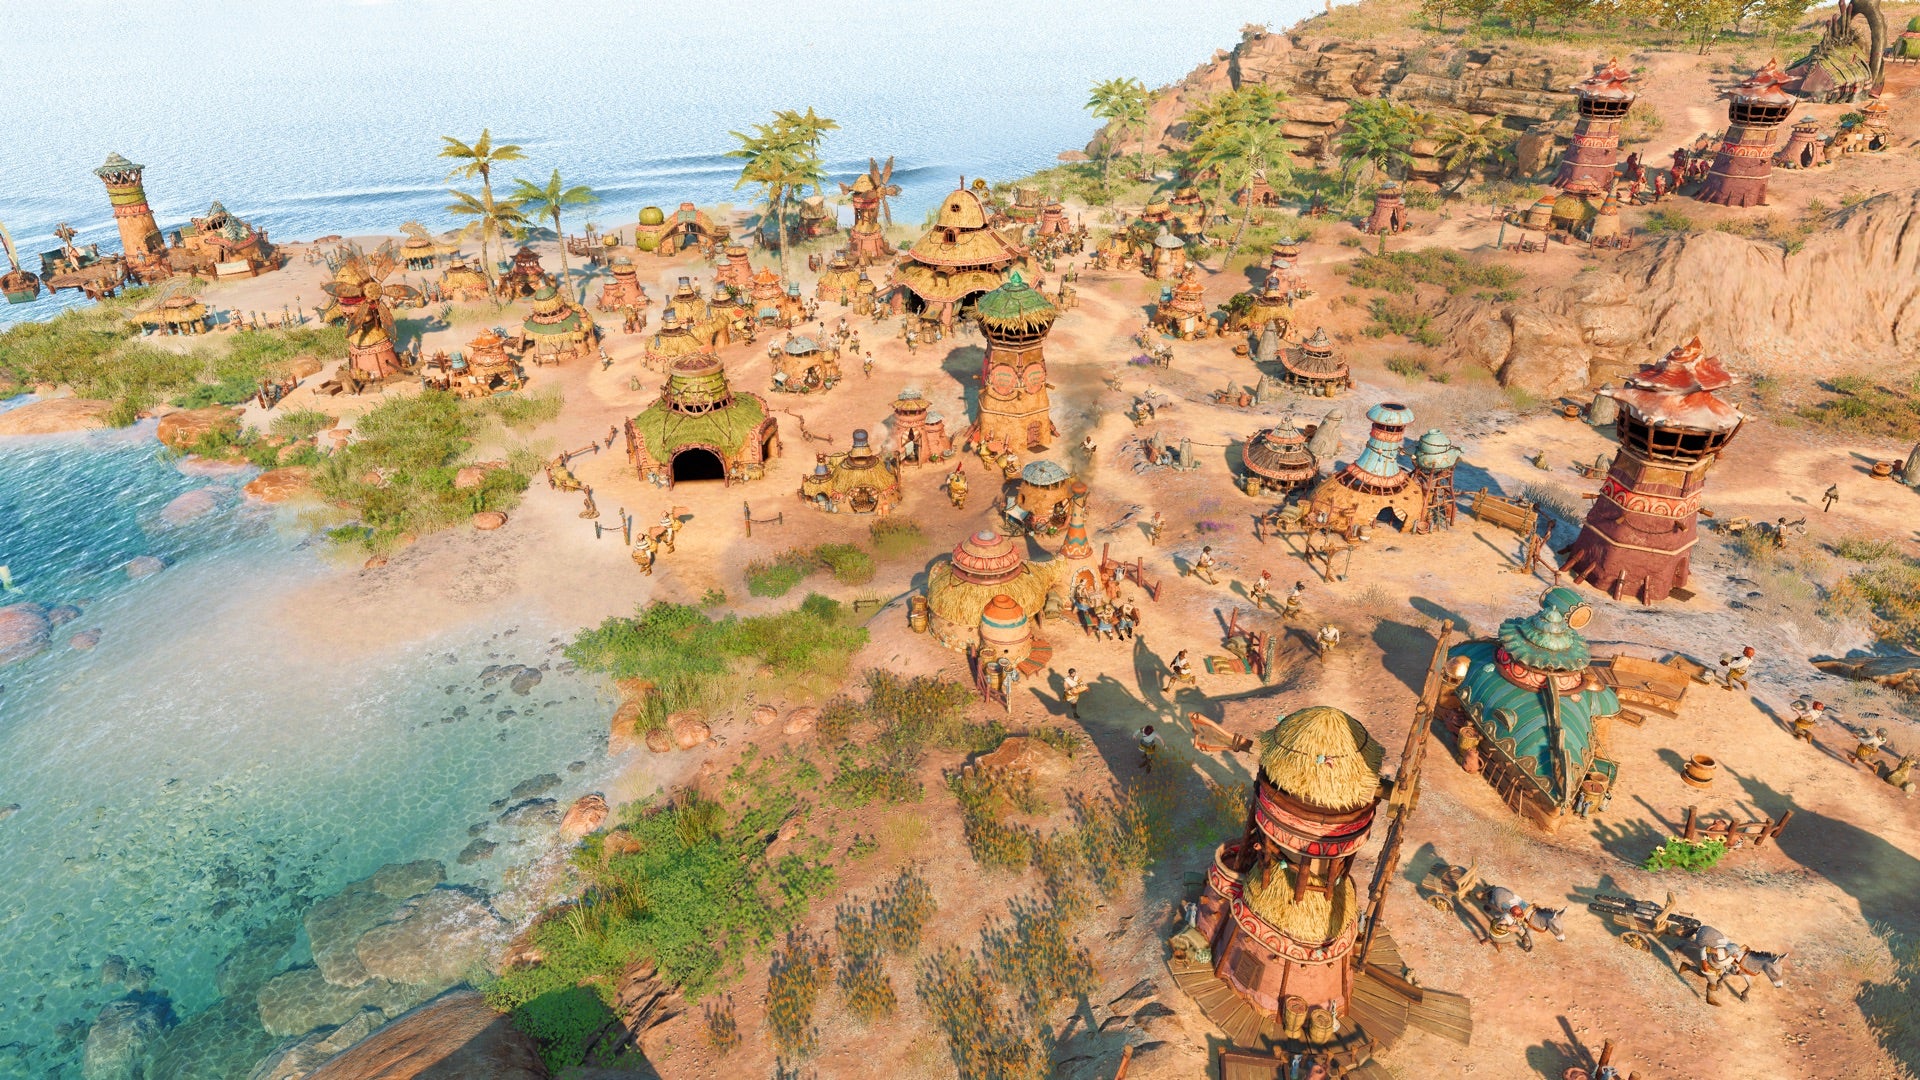 Image for Ubisoft's troubled The Settlers reboot now aiming for February 2023 on PC